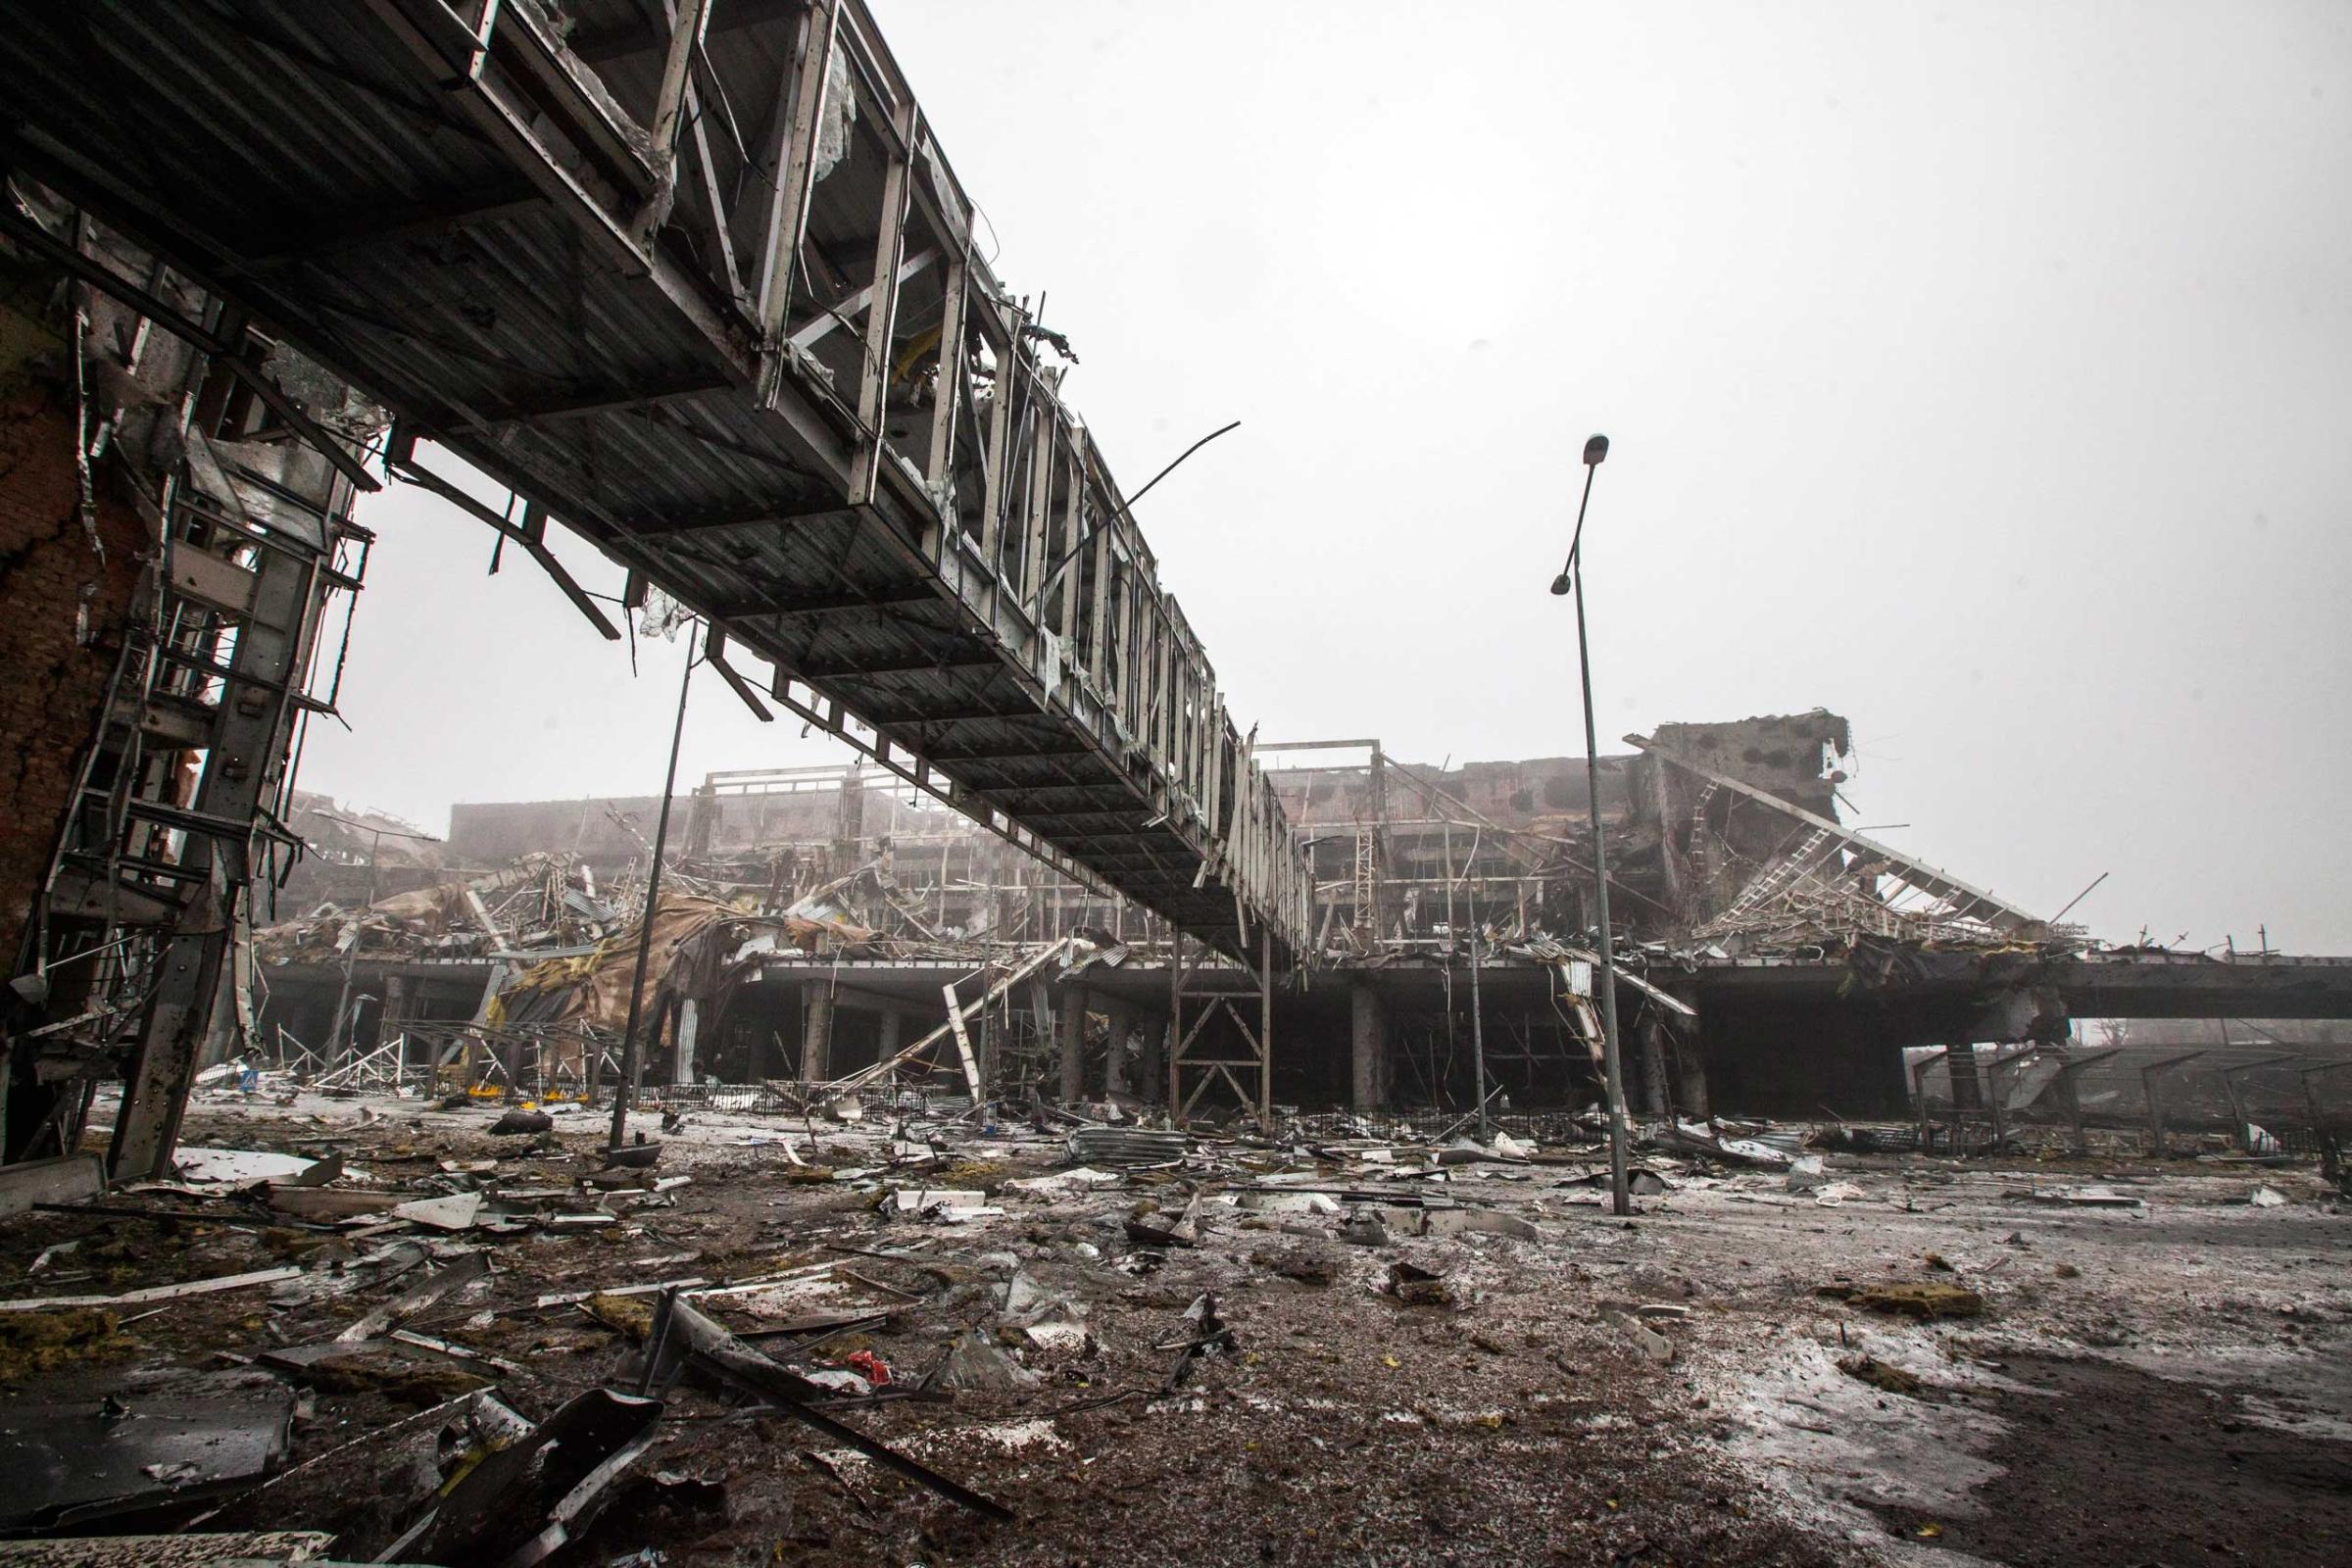 The destroyed airport on Jan. 21, 2015.